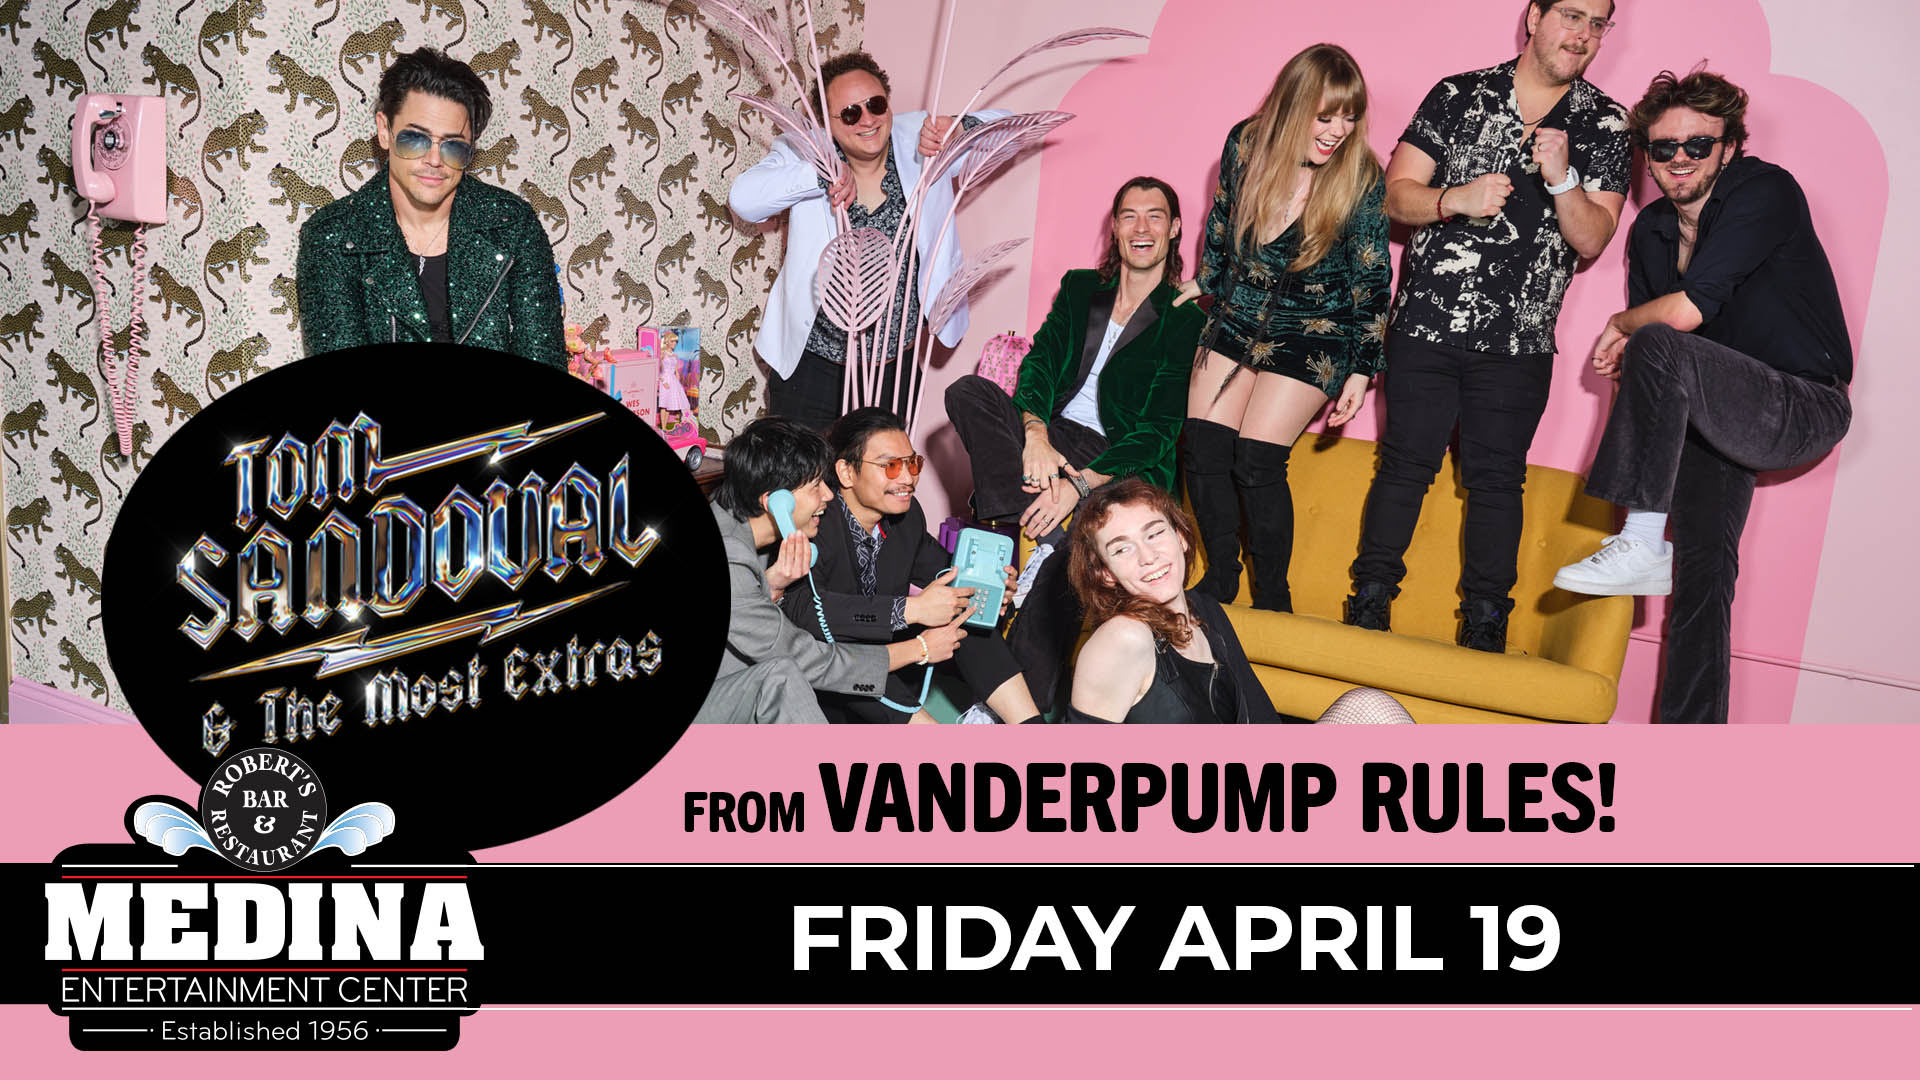 Tom Sandoval & The Most Extras ‘From Vanderpump Rules’ Medina Entertainment Center Wednesday, April 24th, 2024 Doors: 7:30PM | DJ: 7:30PM | Music 8:30pm | 21+ Tickets on-sale Friday, March 1st at 12PM General Admission: $34 Advance / $39 Day of Show plus applicable fees